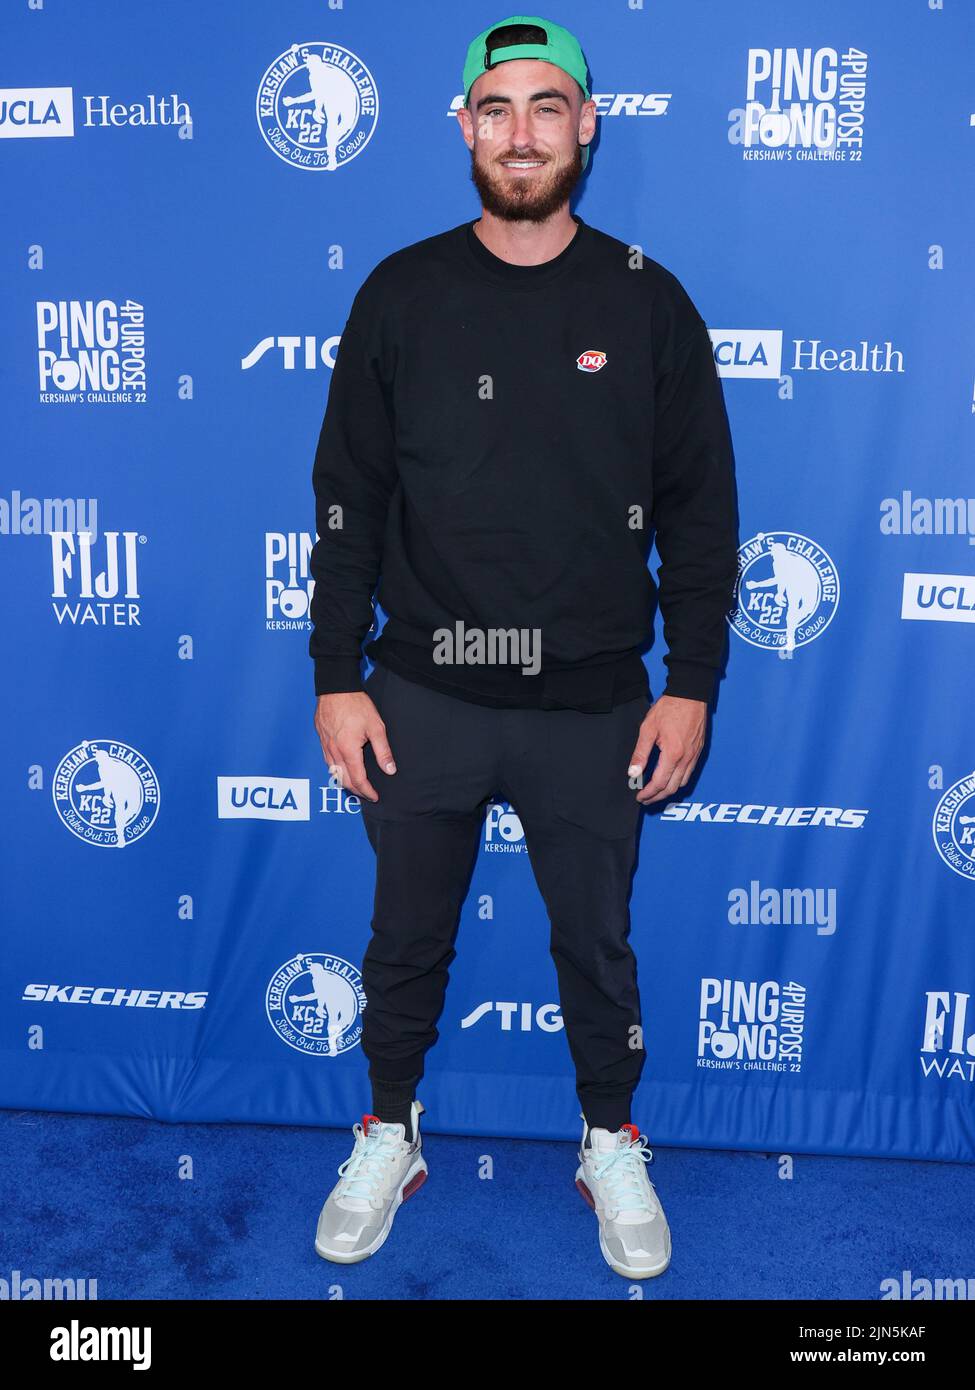 ELYSIAN PARK, LOS ANGELES, CALIFORNIA, USA - AUGUST 08: American professional baseball outfielder and first baseman for the Los Angeles Dodgers of Major League Baseball Cody Bellinger arrives at Kershaw's Challenge Ping Pong 4 Purpose 2022 held at Dodger Stadium on August 8, 2022 in Elysian Park, Los Angeles, California, United States. (Photo by Xavier Collin/Image Press Agency) Stock Photo